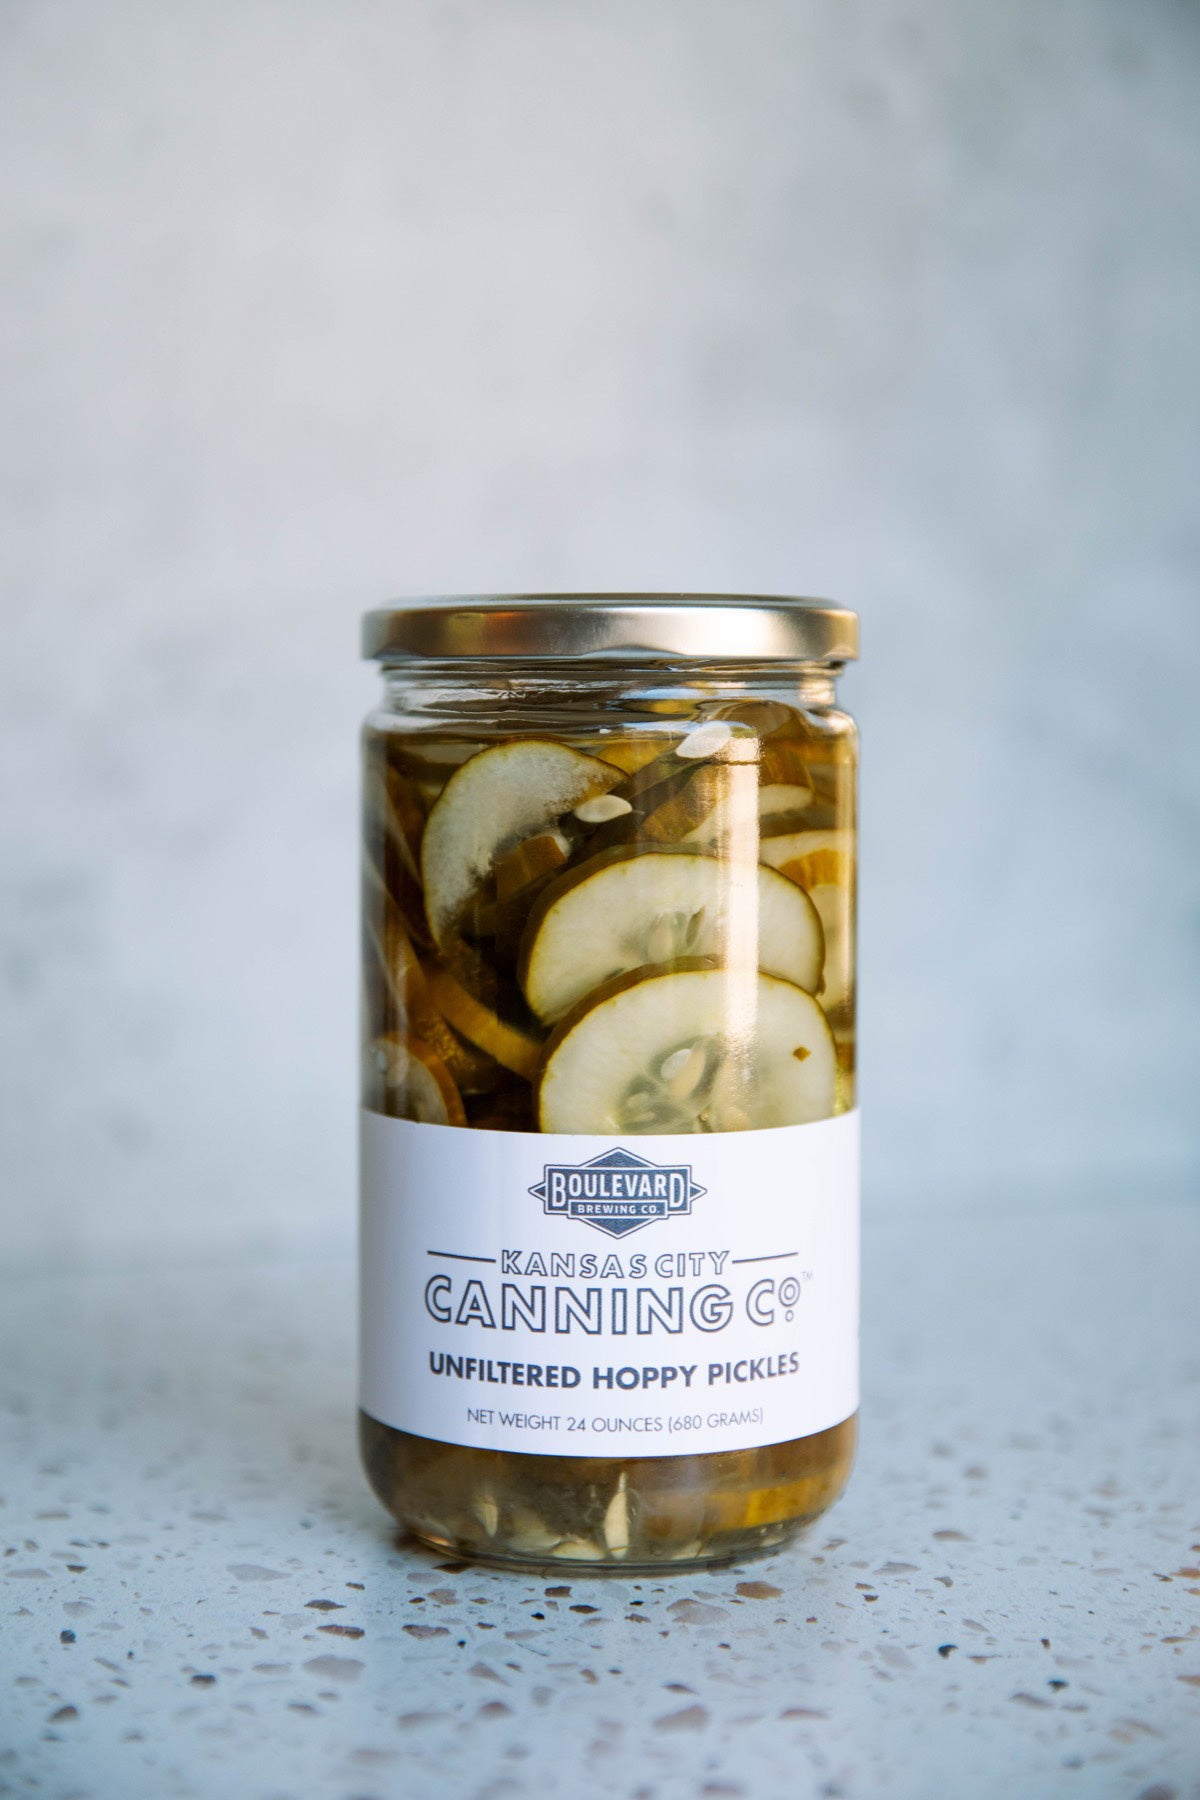 Unfiltered Hoppy Pickles - Kansas City Canning Co.